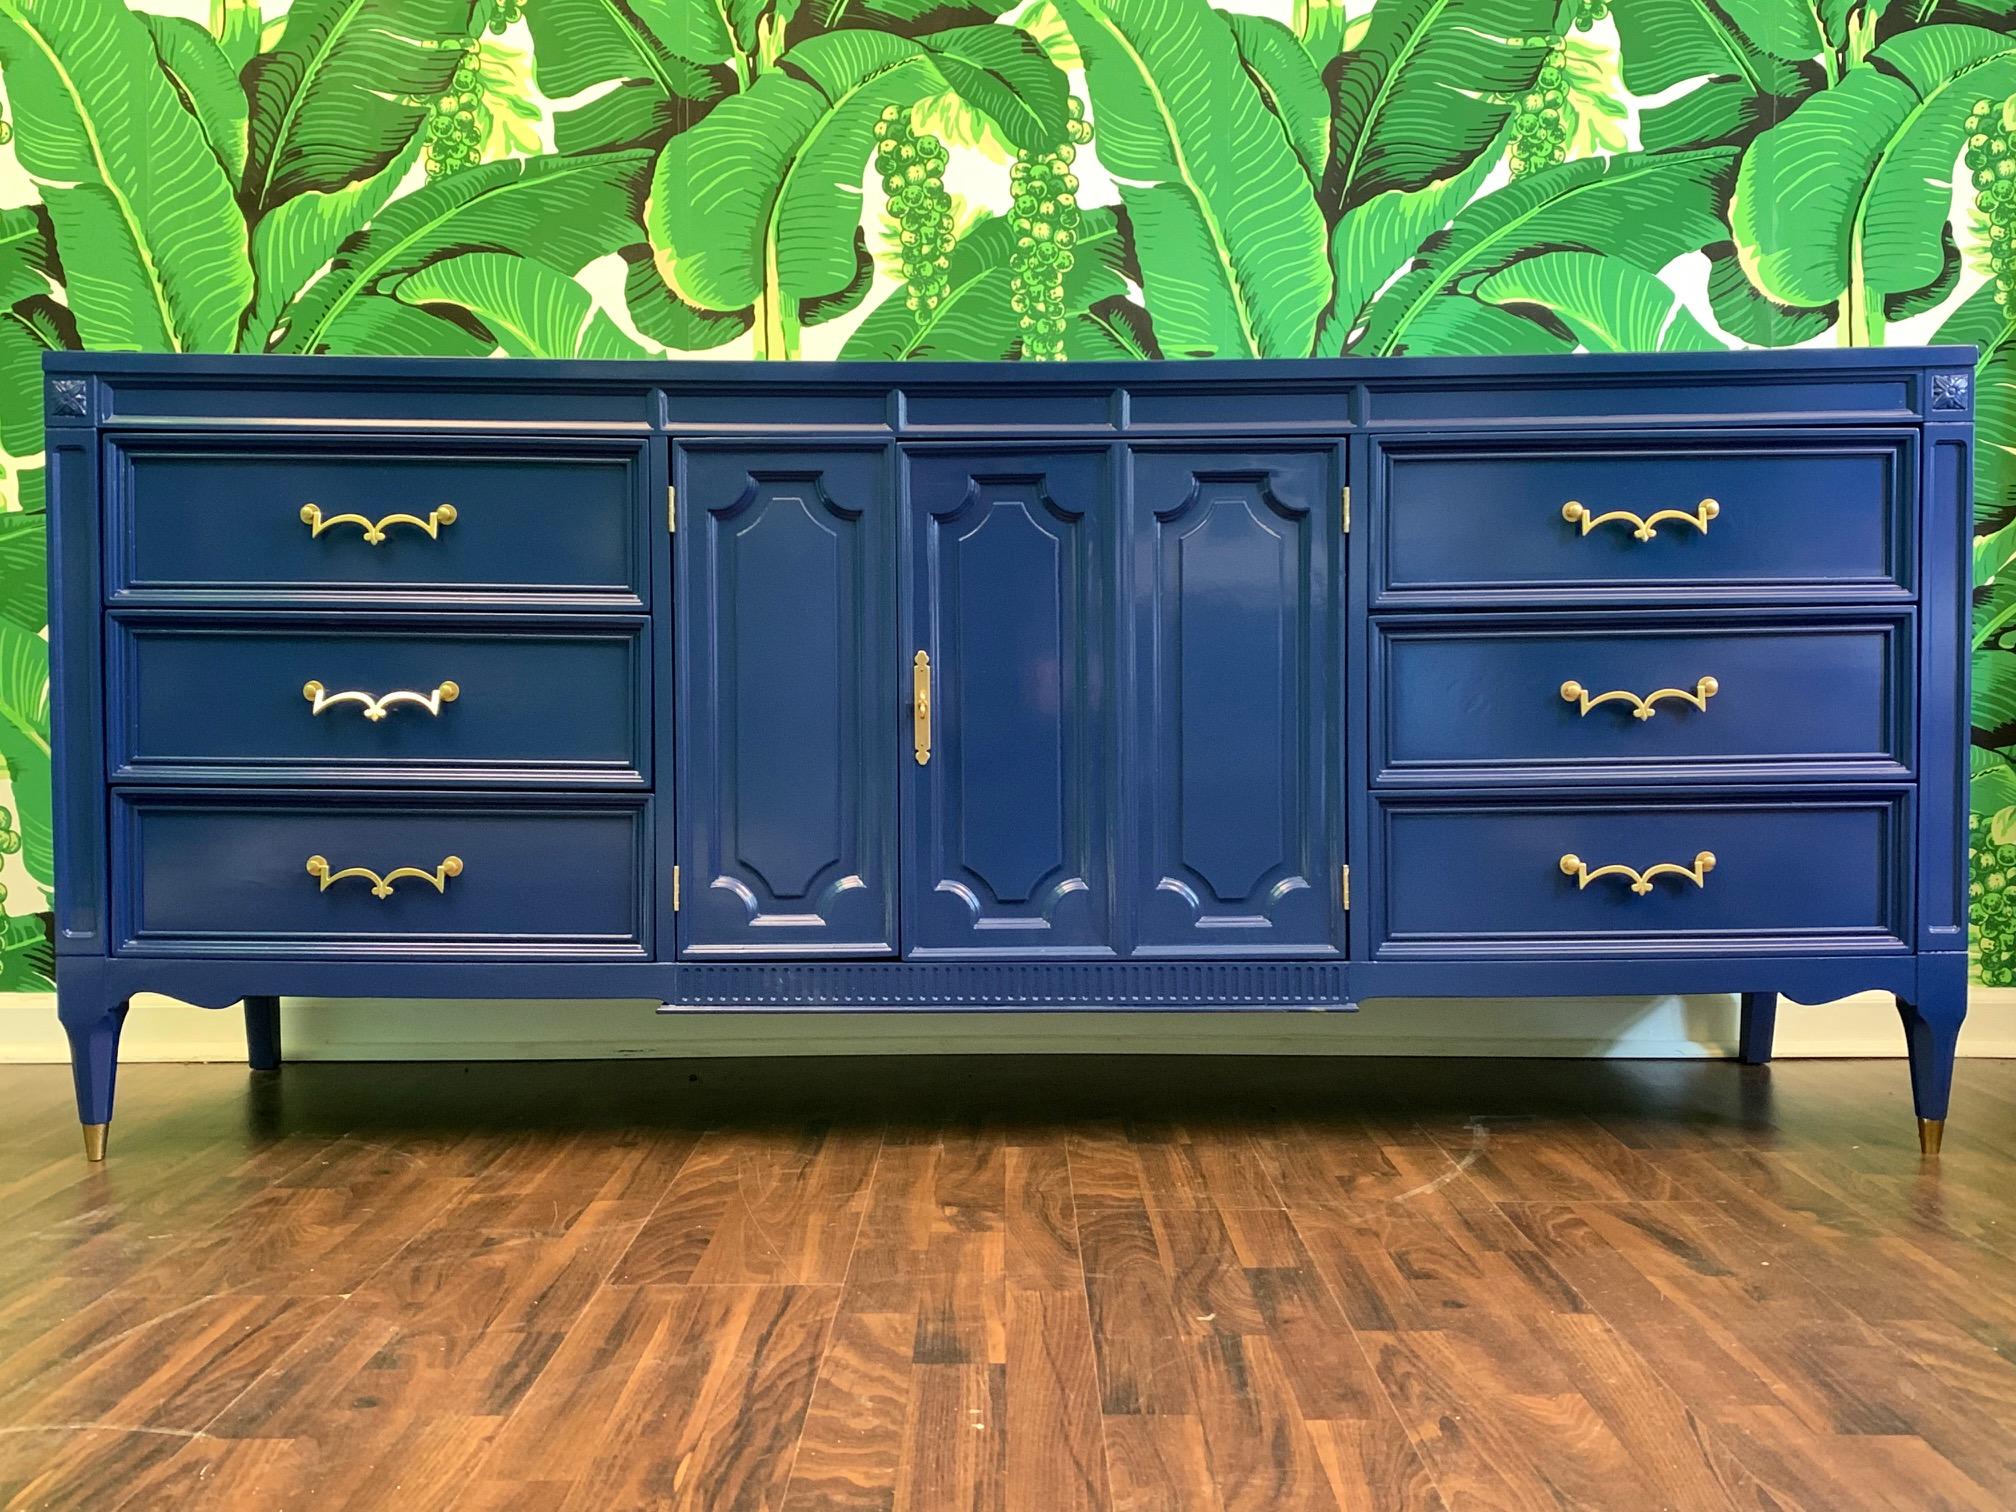 Midcentury dresser by American of Martinsville features brass hardware, brass feet, and asymmetrical centre doors revealing centre drawers. Finished in high gloss blue. Very good vintage condition with minor imperfections to the newly lacquered